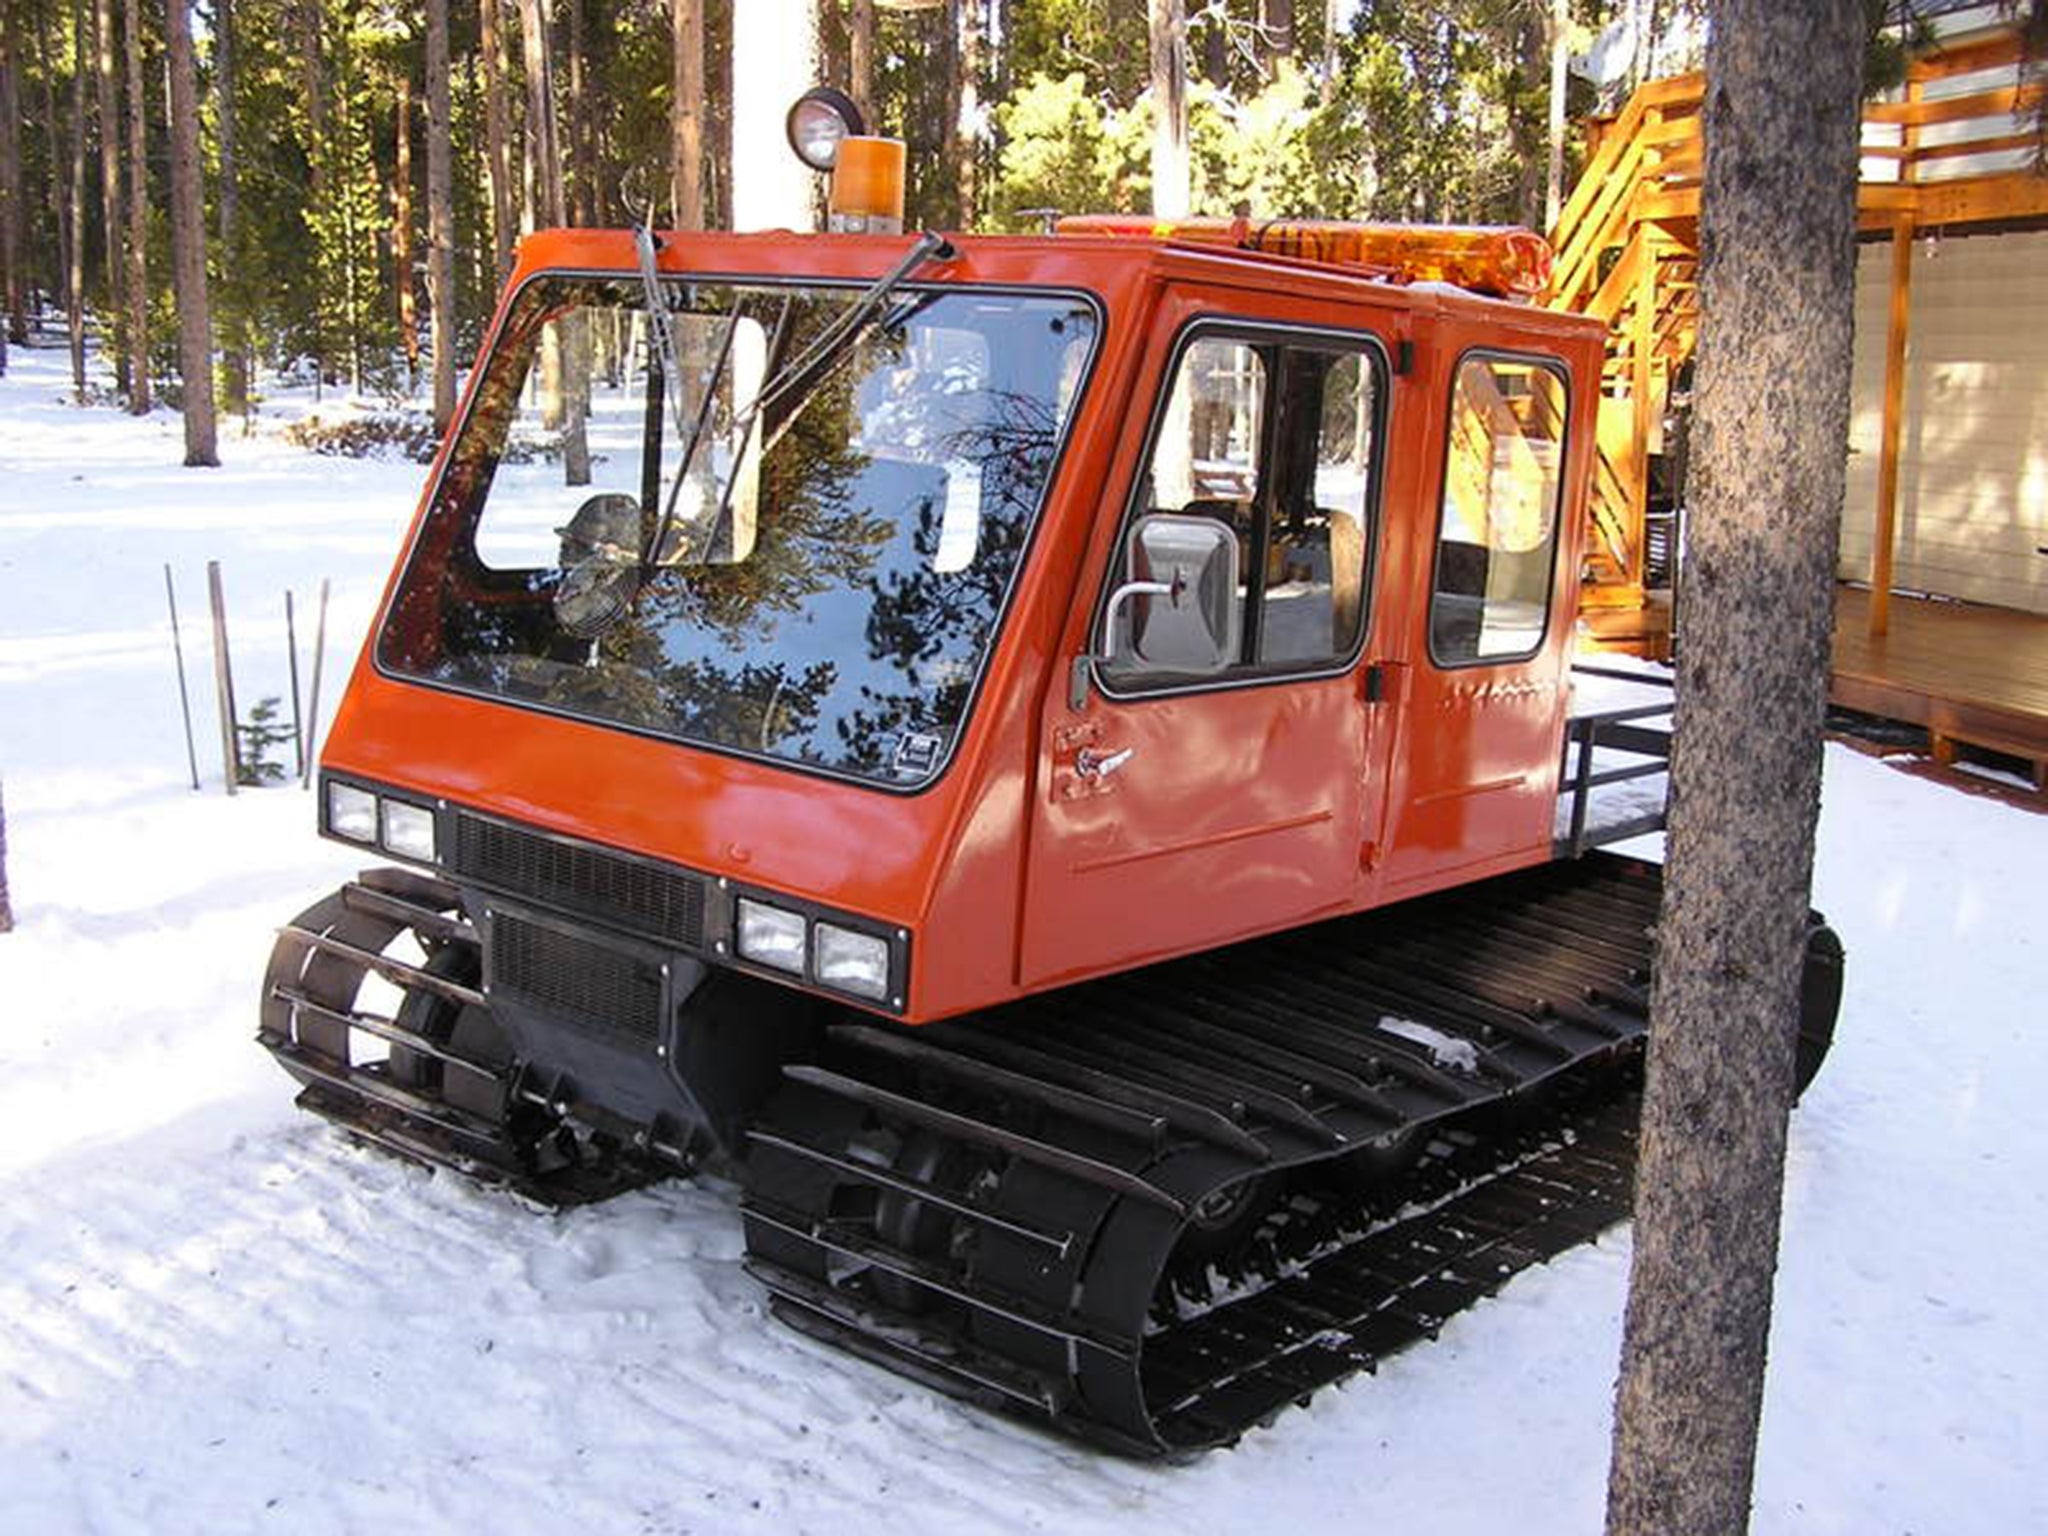 Snowcat machines are often used to clear tonnes of snow to prepare slopes for skiers